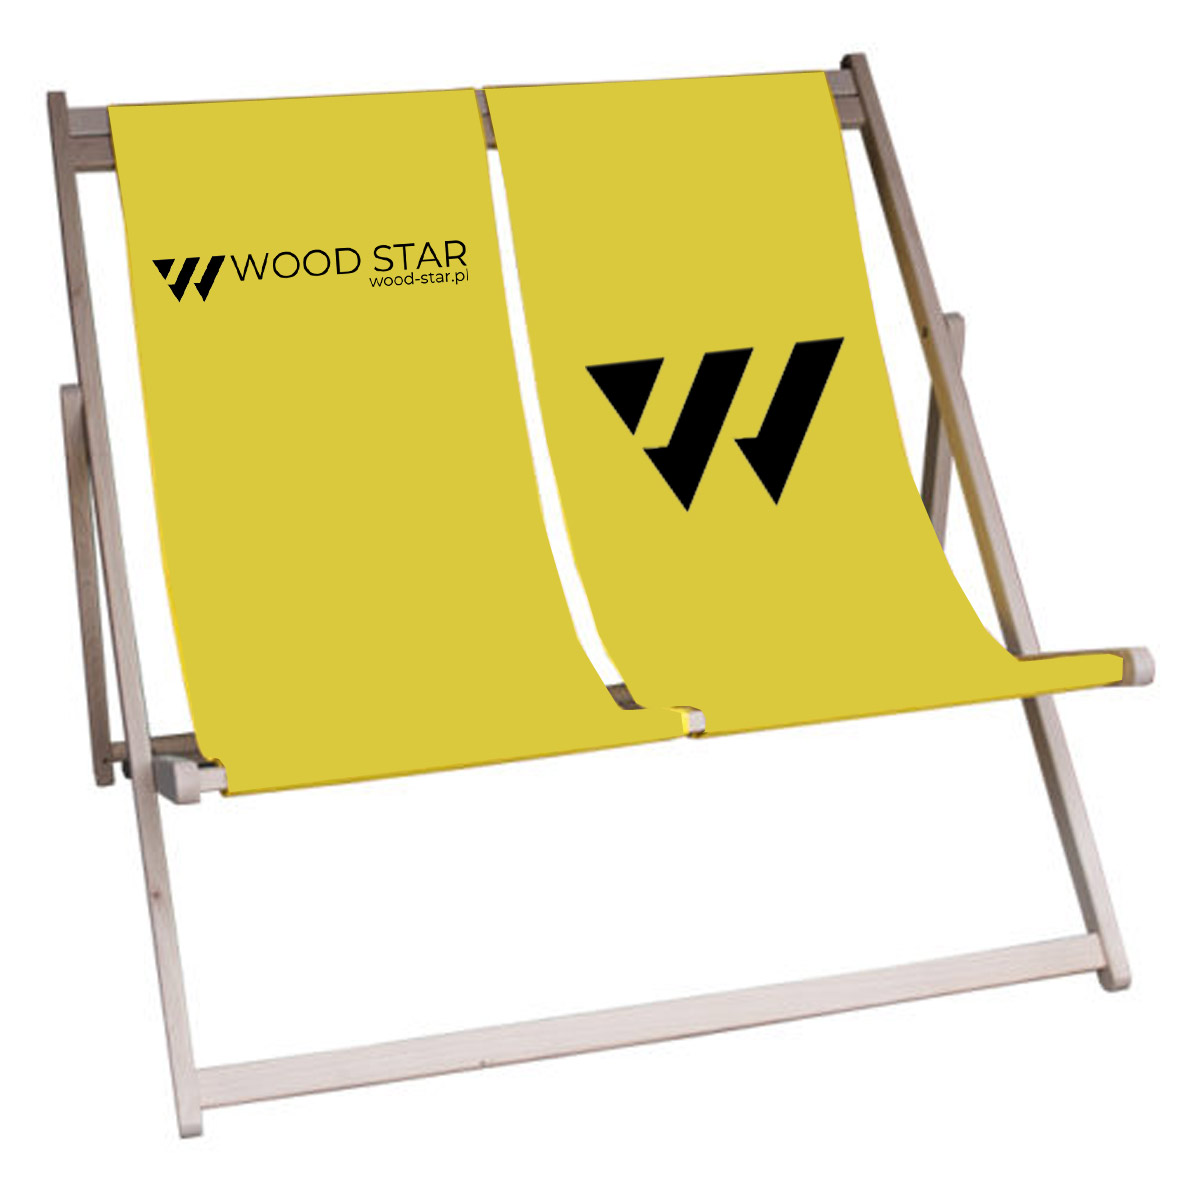 Wood sunbed with logo